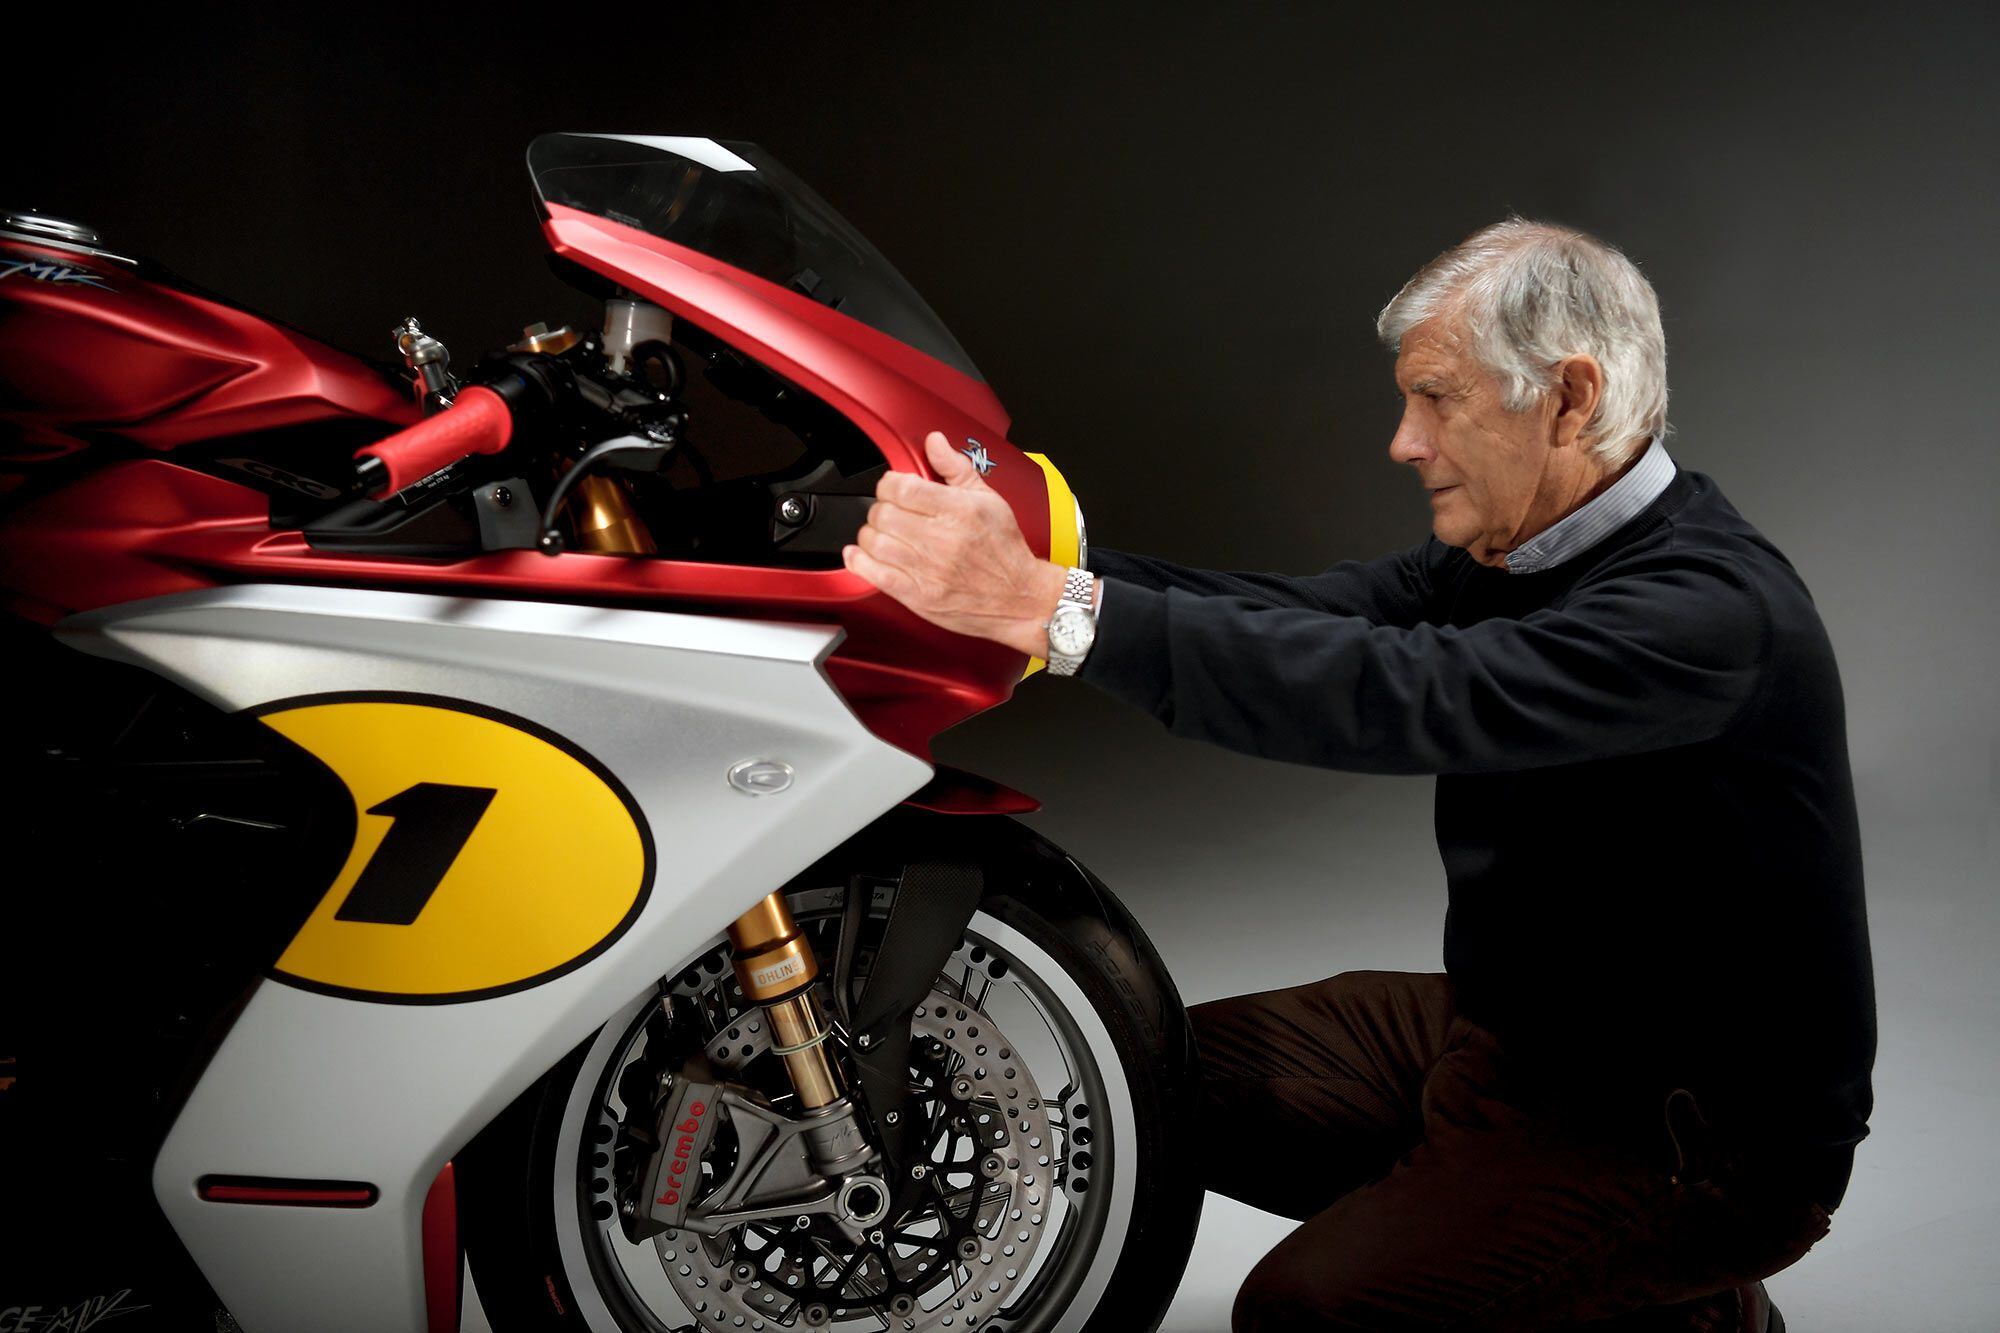 The man and the machine, Agostini at 79 years old face to face with the new MV Superveloce that bears his name. Only 311 of the bikes will be produced, one for each of Ago’s victories aboard MV racers.